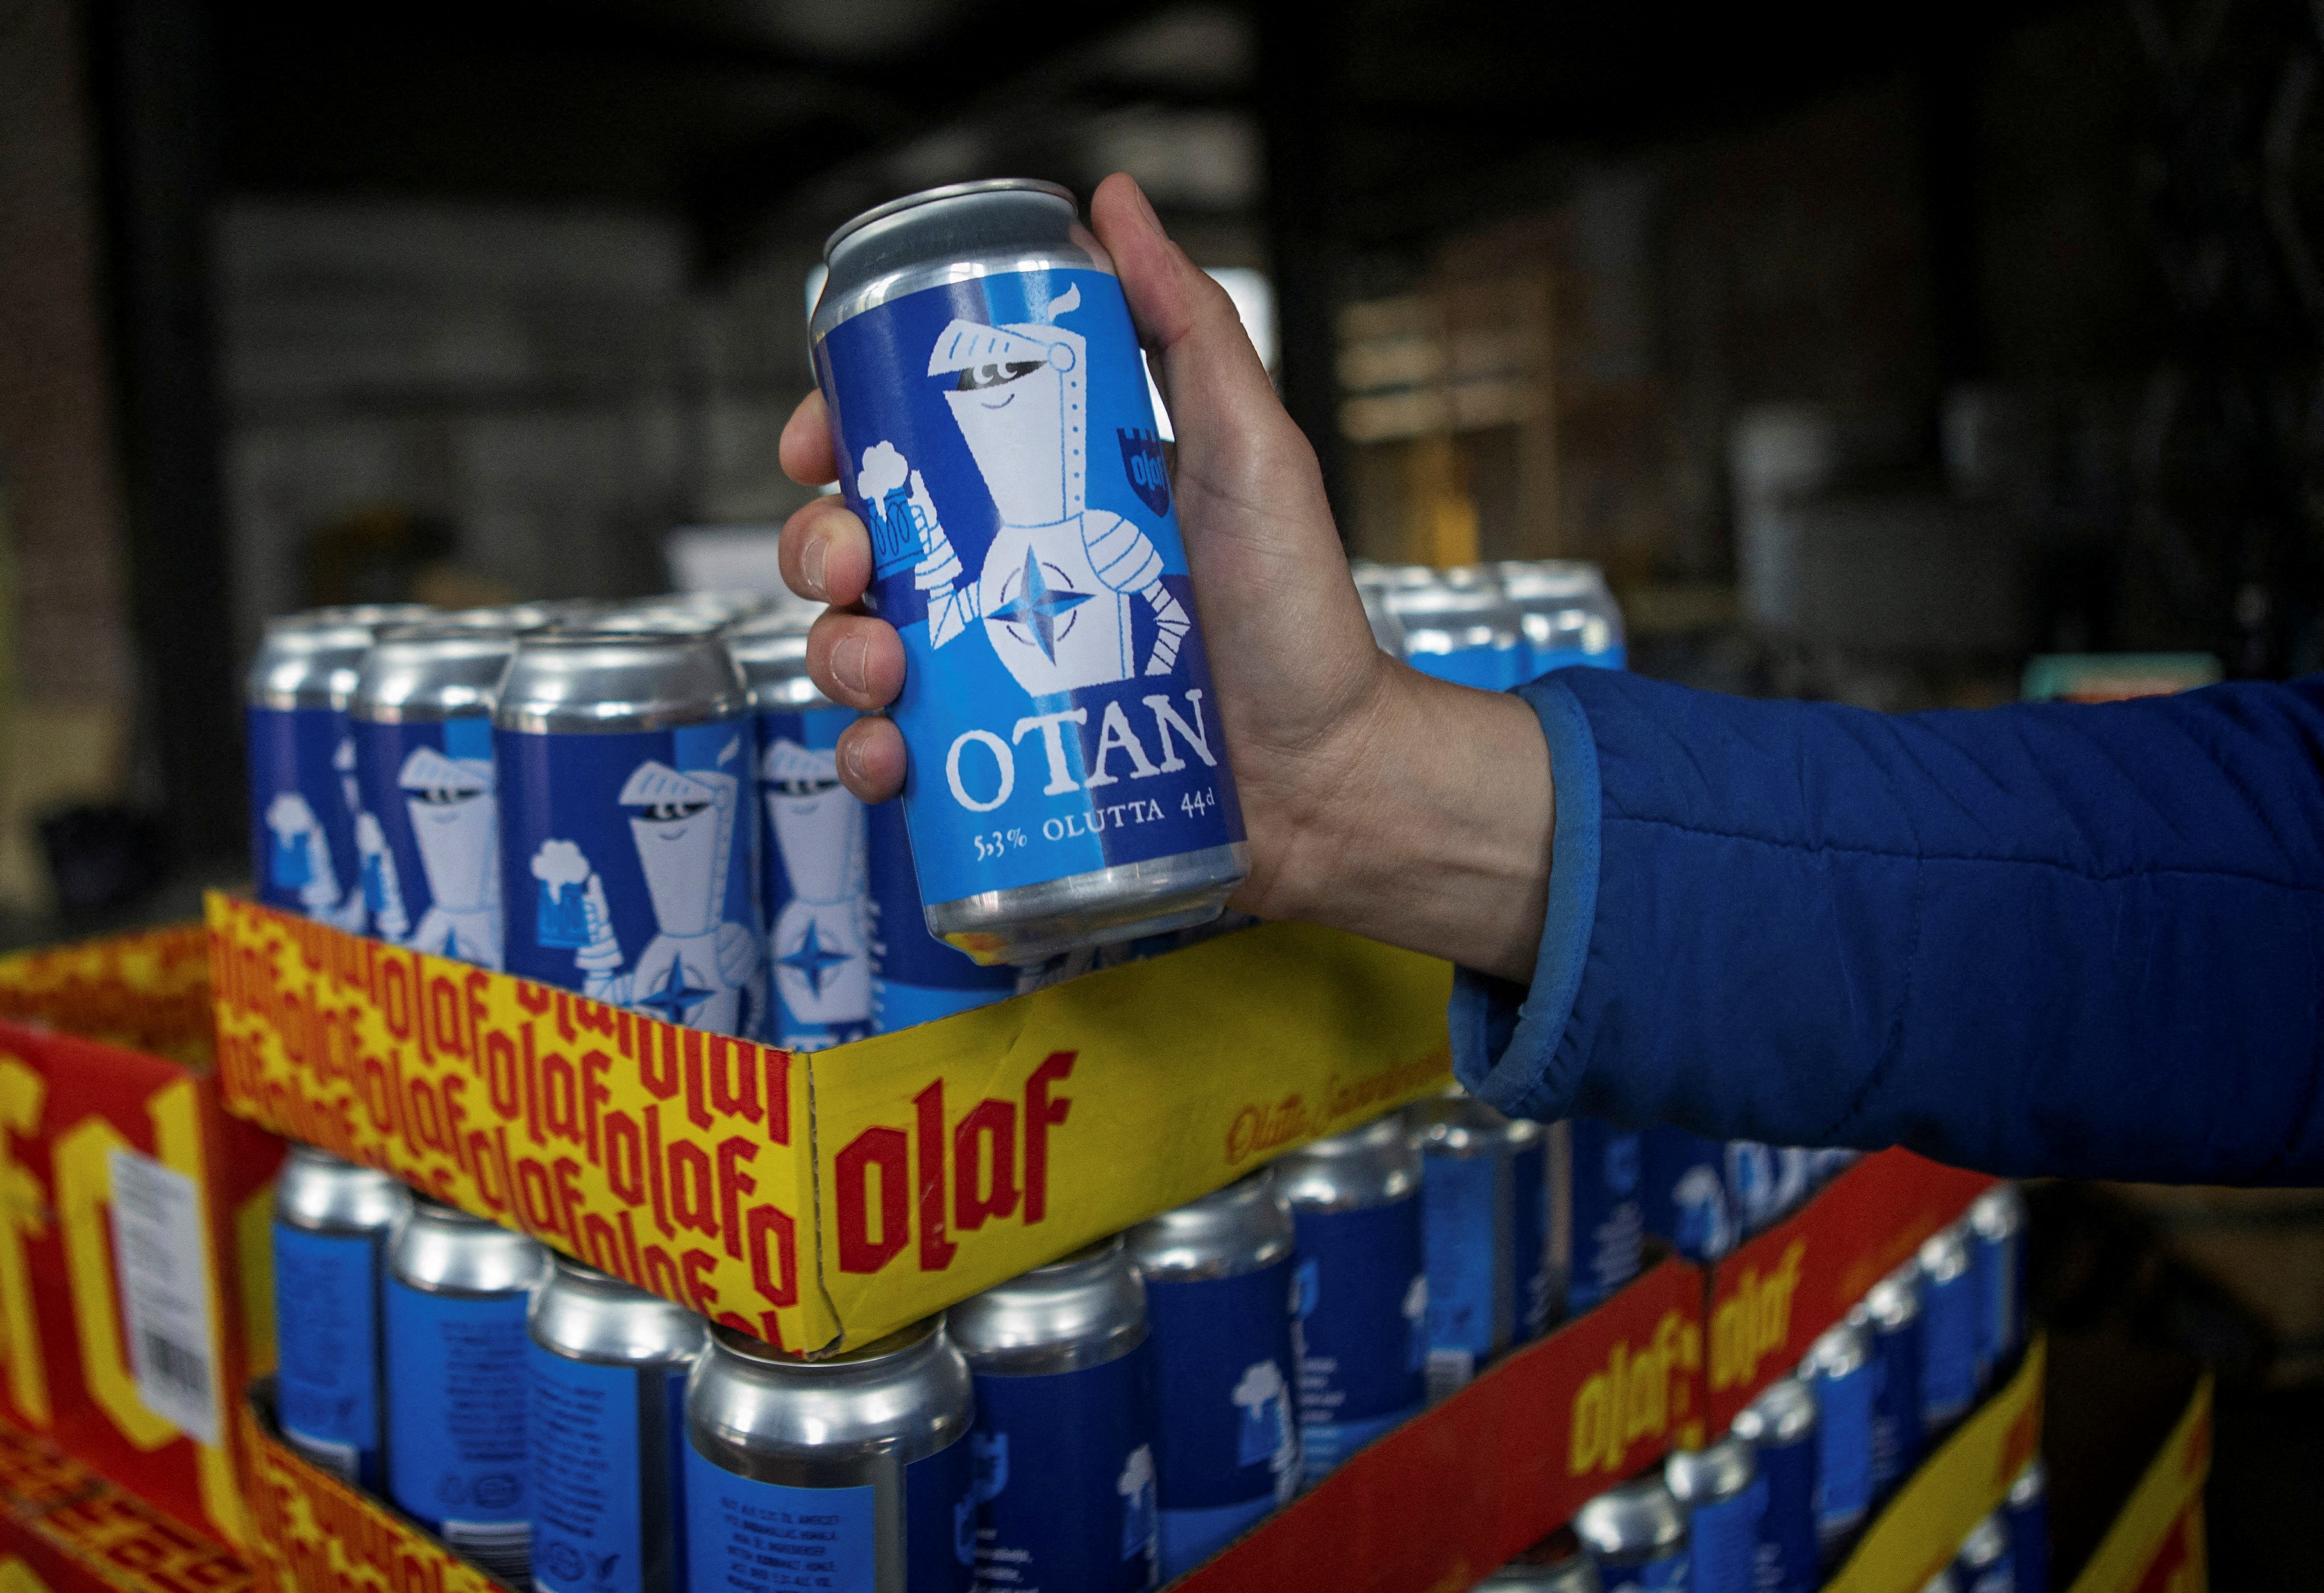 Nato-branded OTAN beer cans by Olaf Brewing Company are pictured in Savonlinna